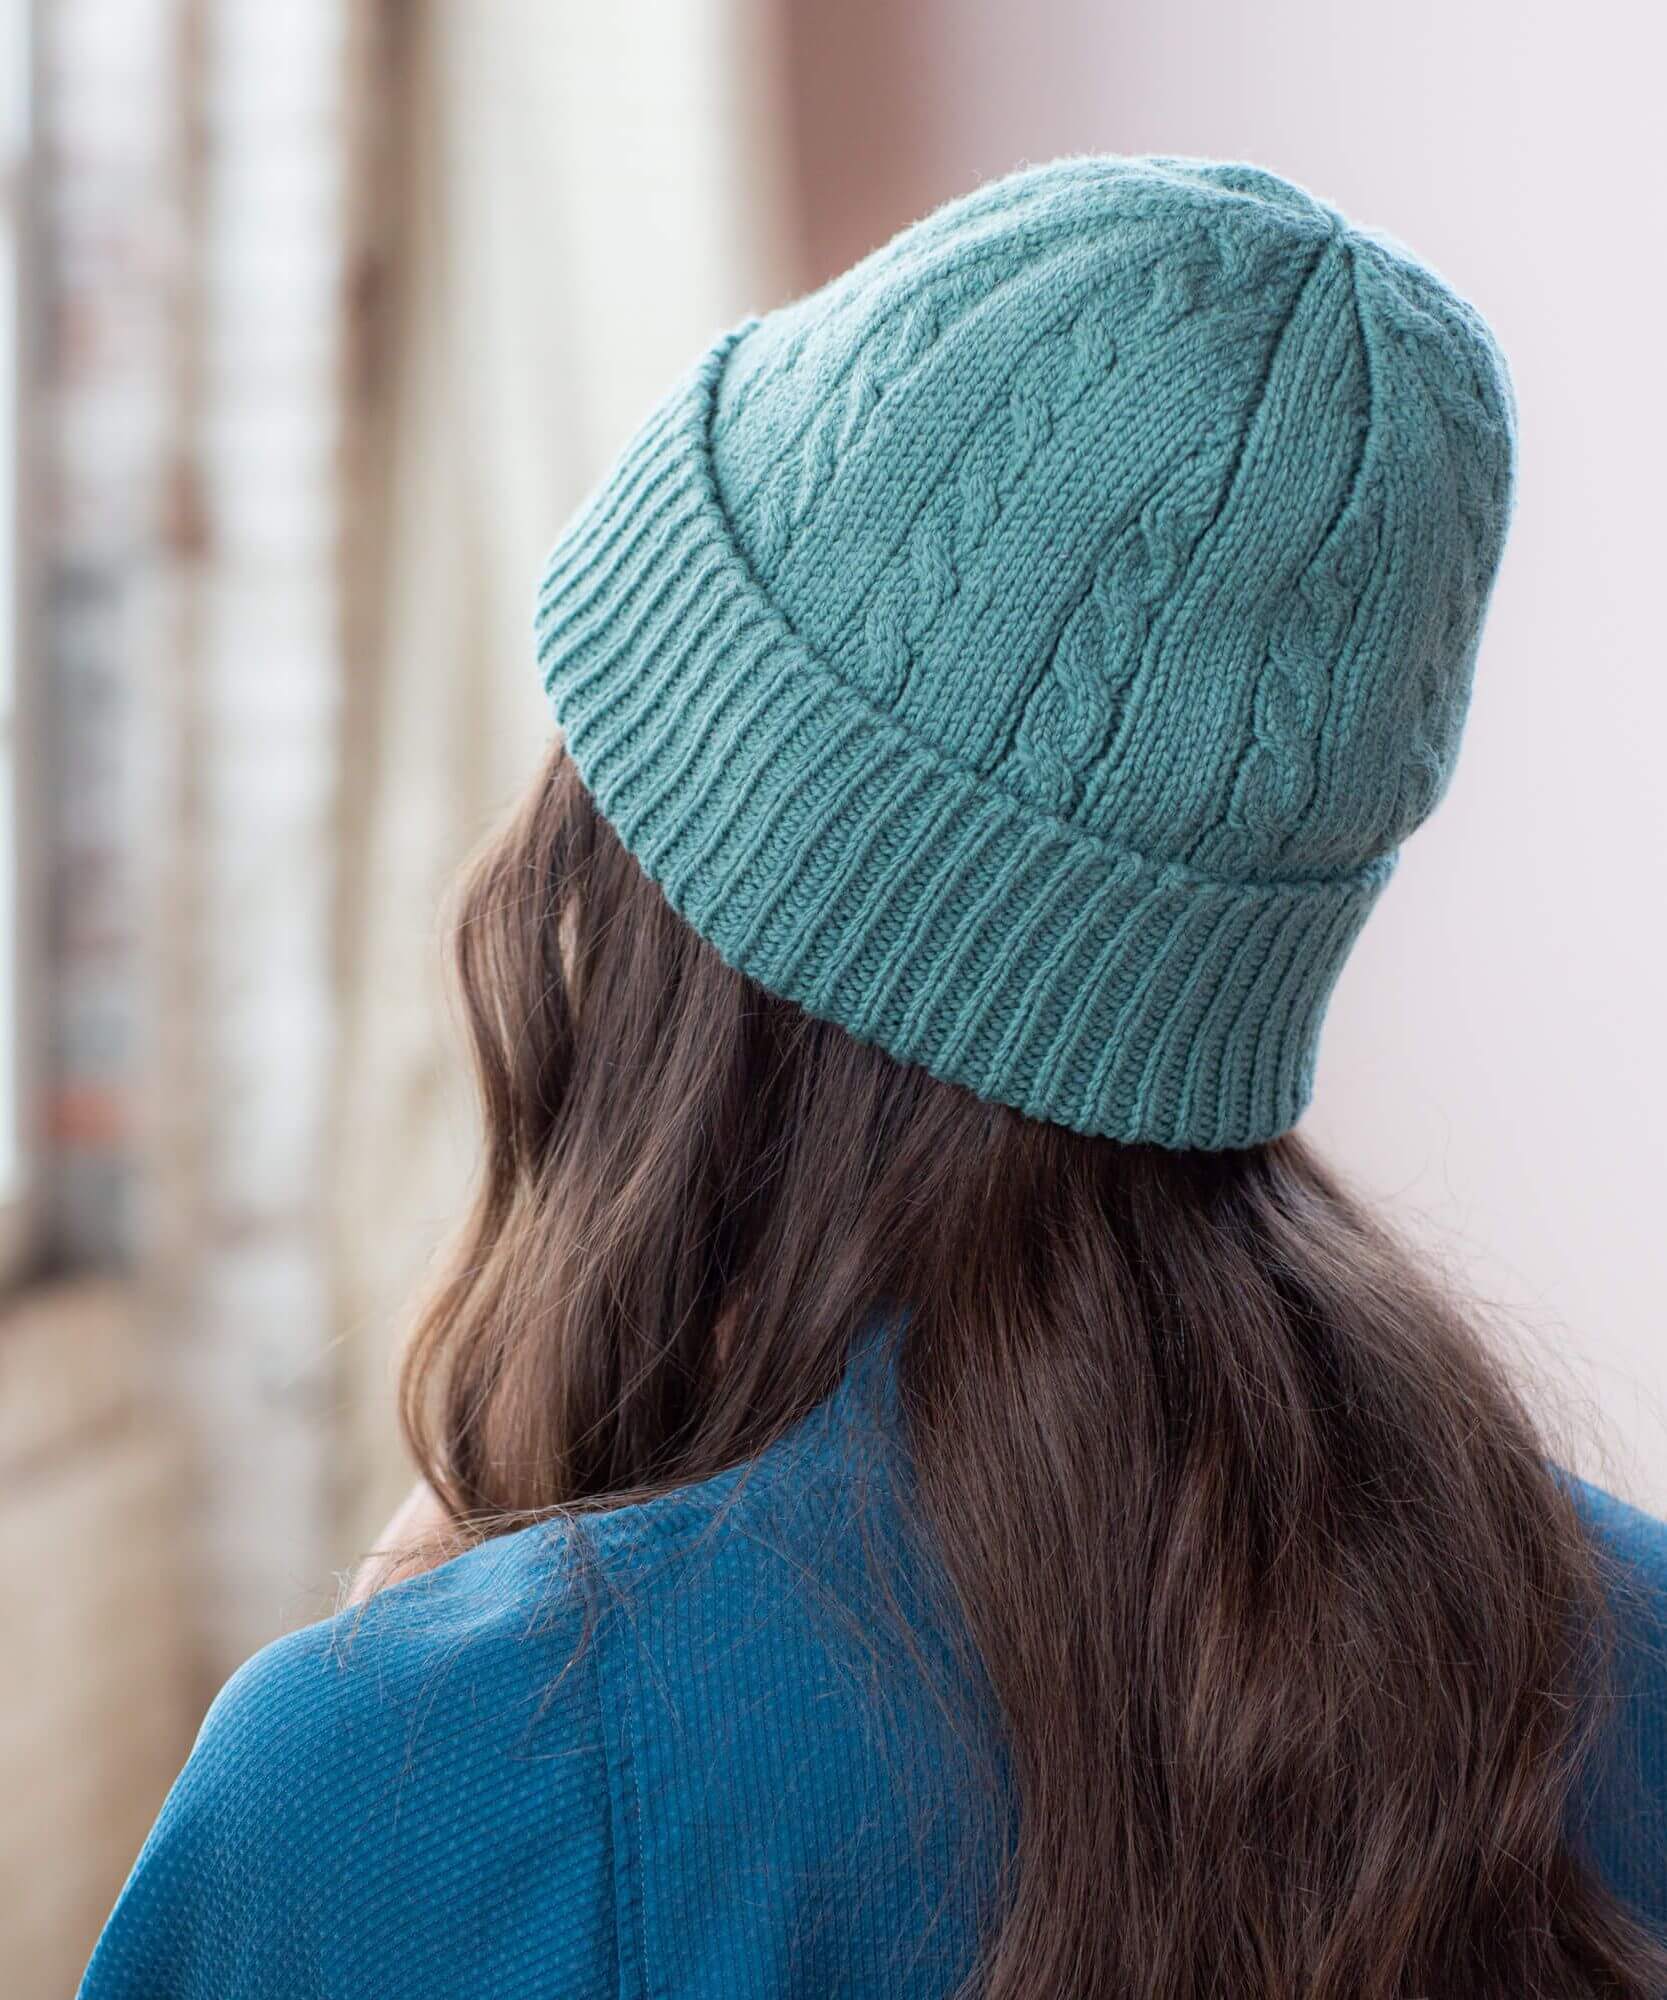 First Cables Hat | Knitting Pattern for BT by Brooklyn Tweed